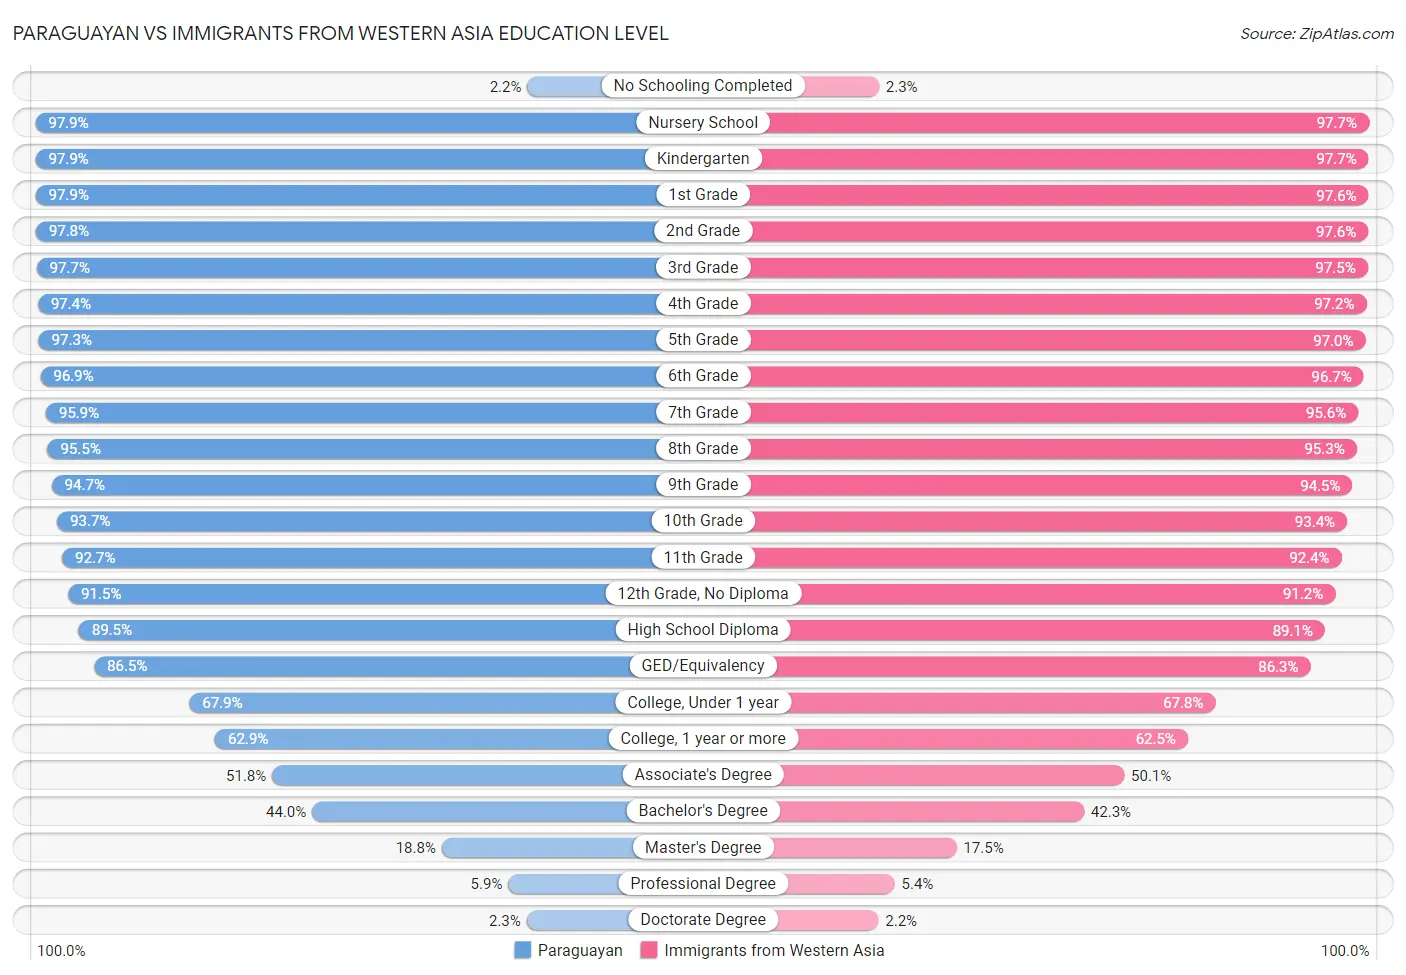 Paraguayan vs Immigrants from Western Asia Education Level